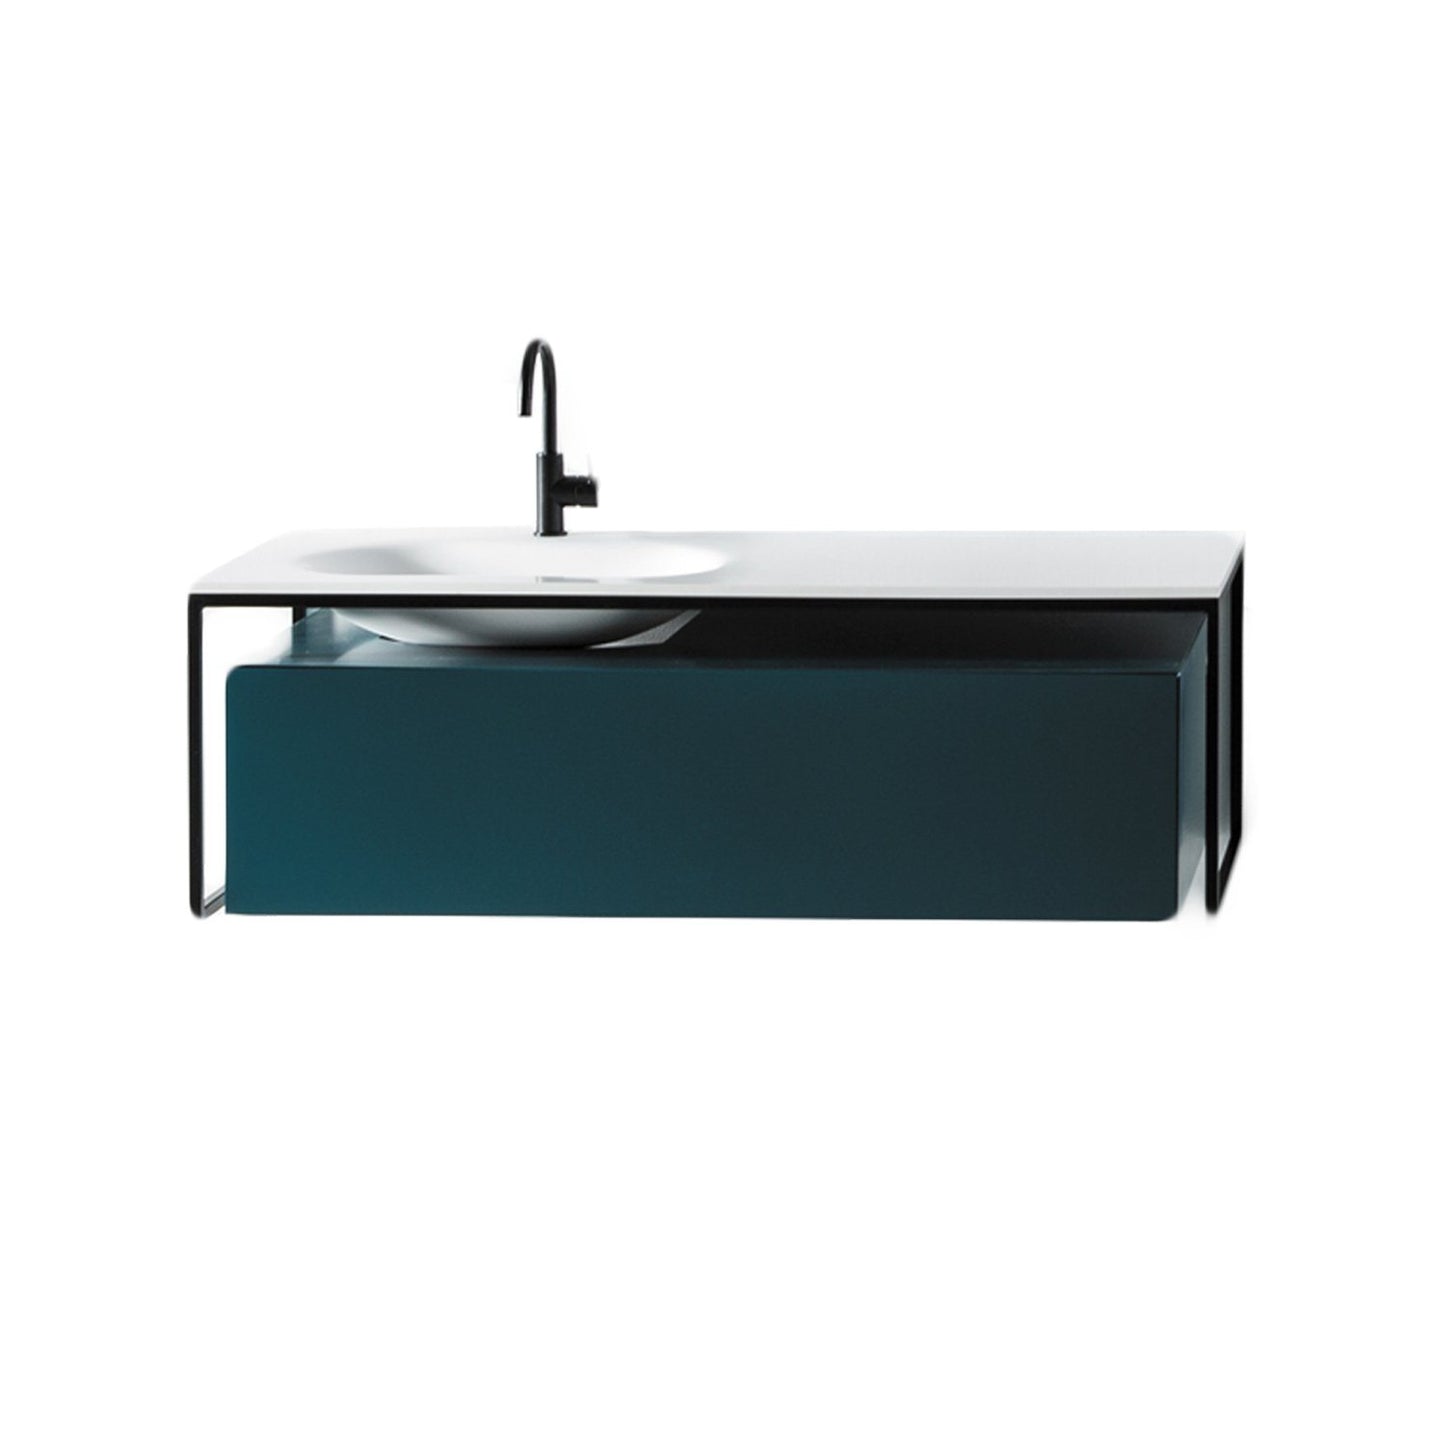 Eviva Modena 51 in. Wall Mounted Teal Bathroom Vanity with White Integrated Solid Surface Countertop - Luxe Bathroom Vanities Luxury Bathroom Fixtures Bathroom Furniture